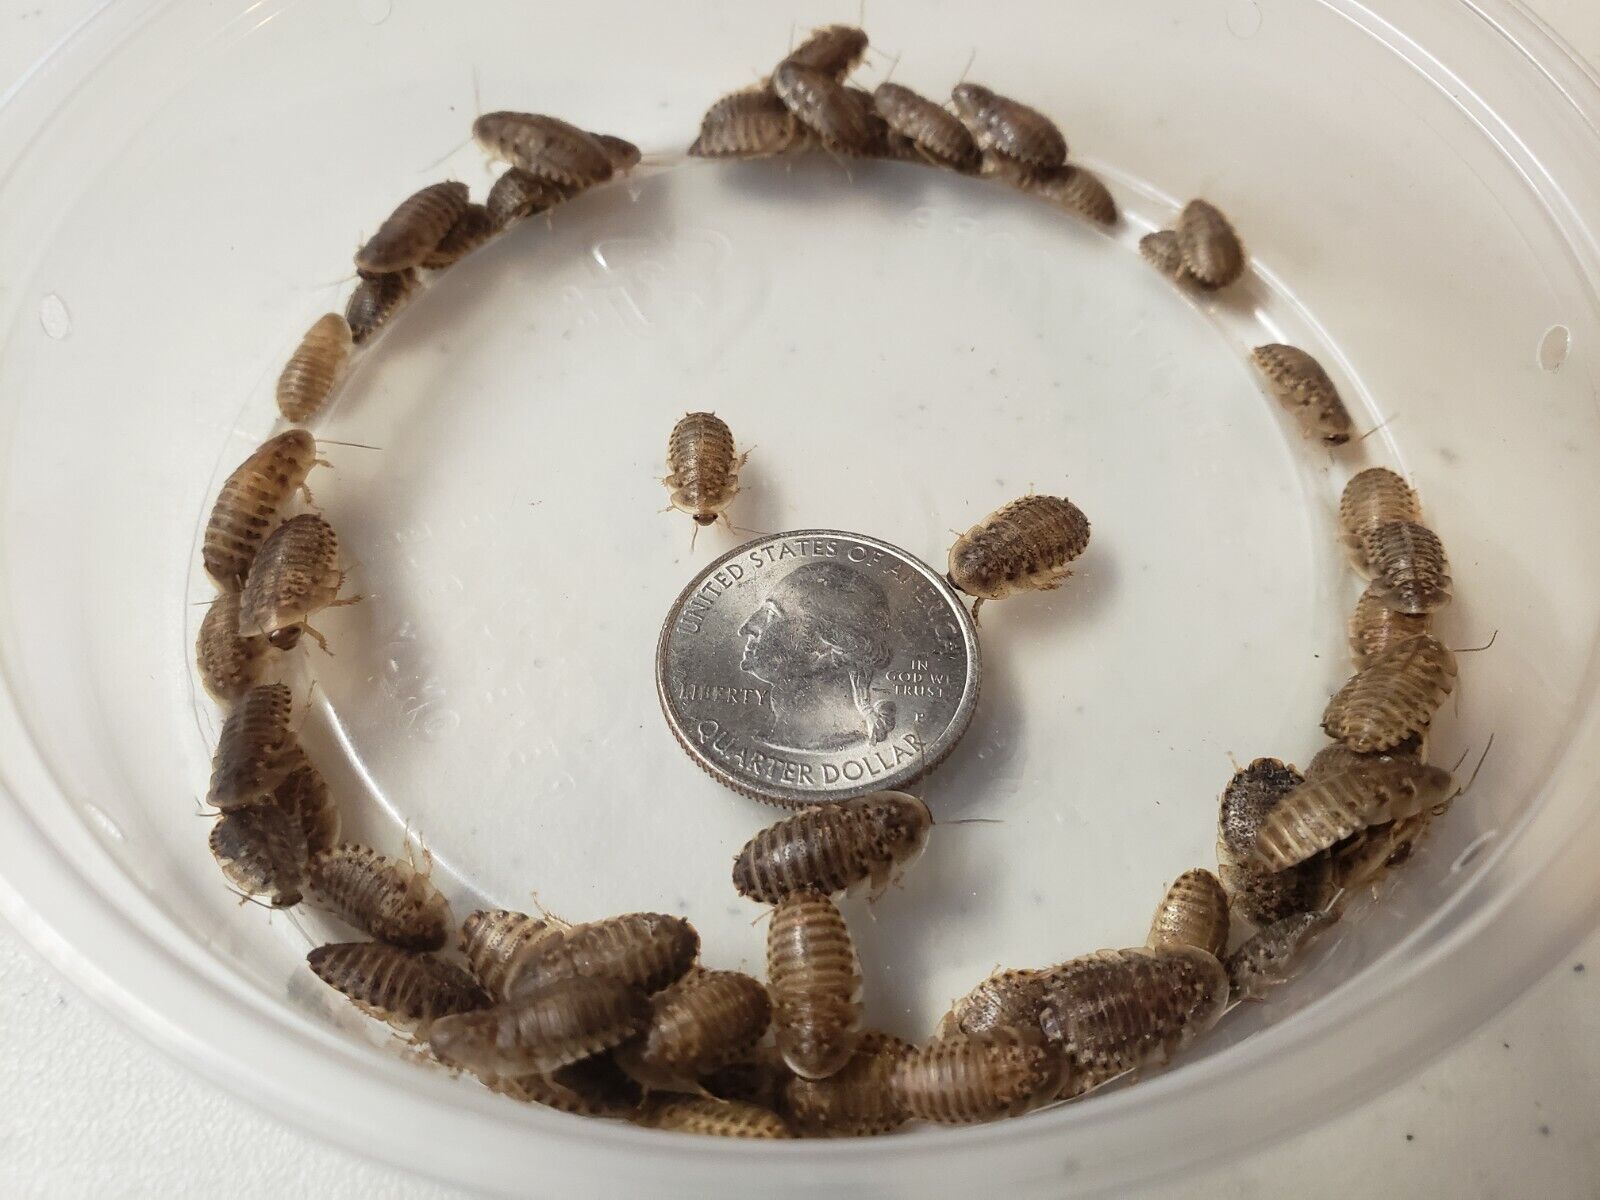 Dubia Roaches Reptile Feeders Small Medium Large XLarge 50+ 100+ 250+ 500+